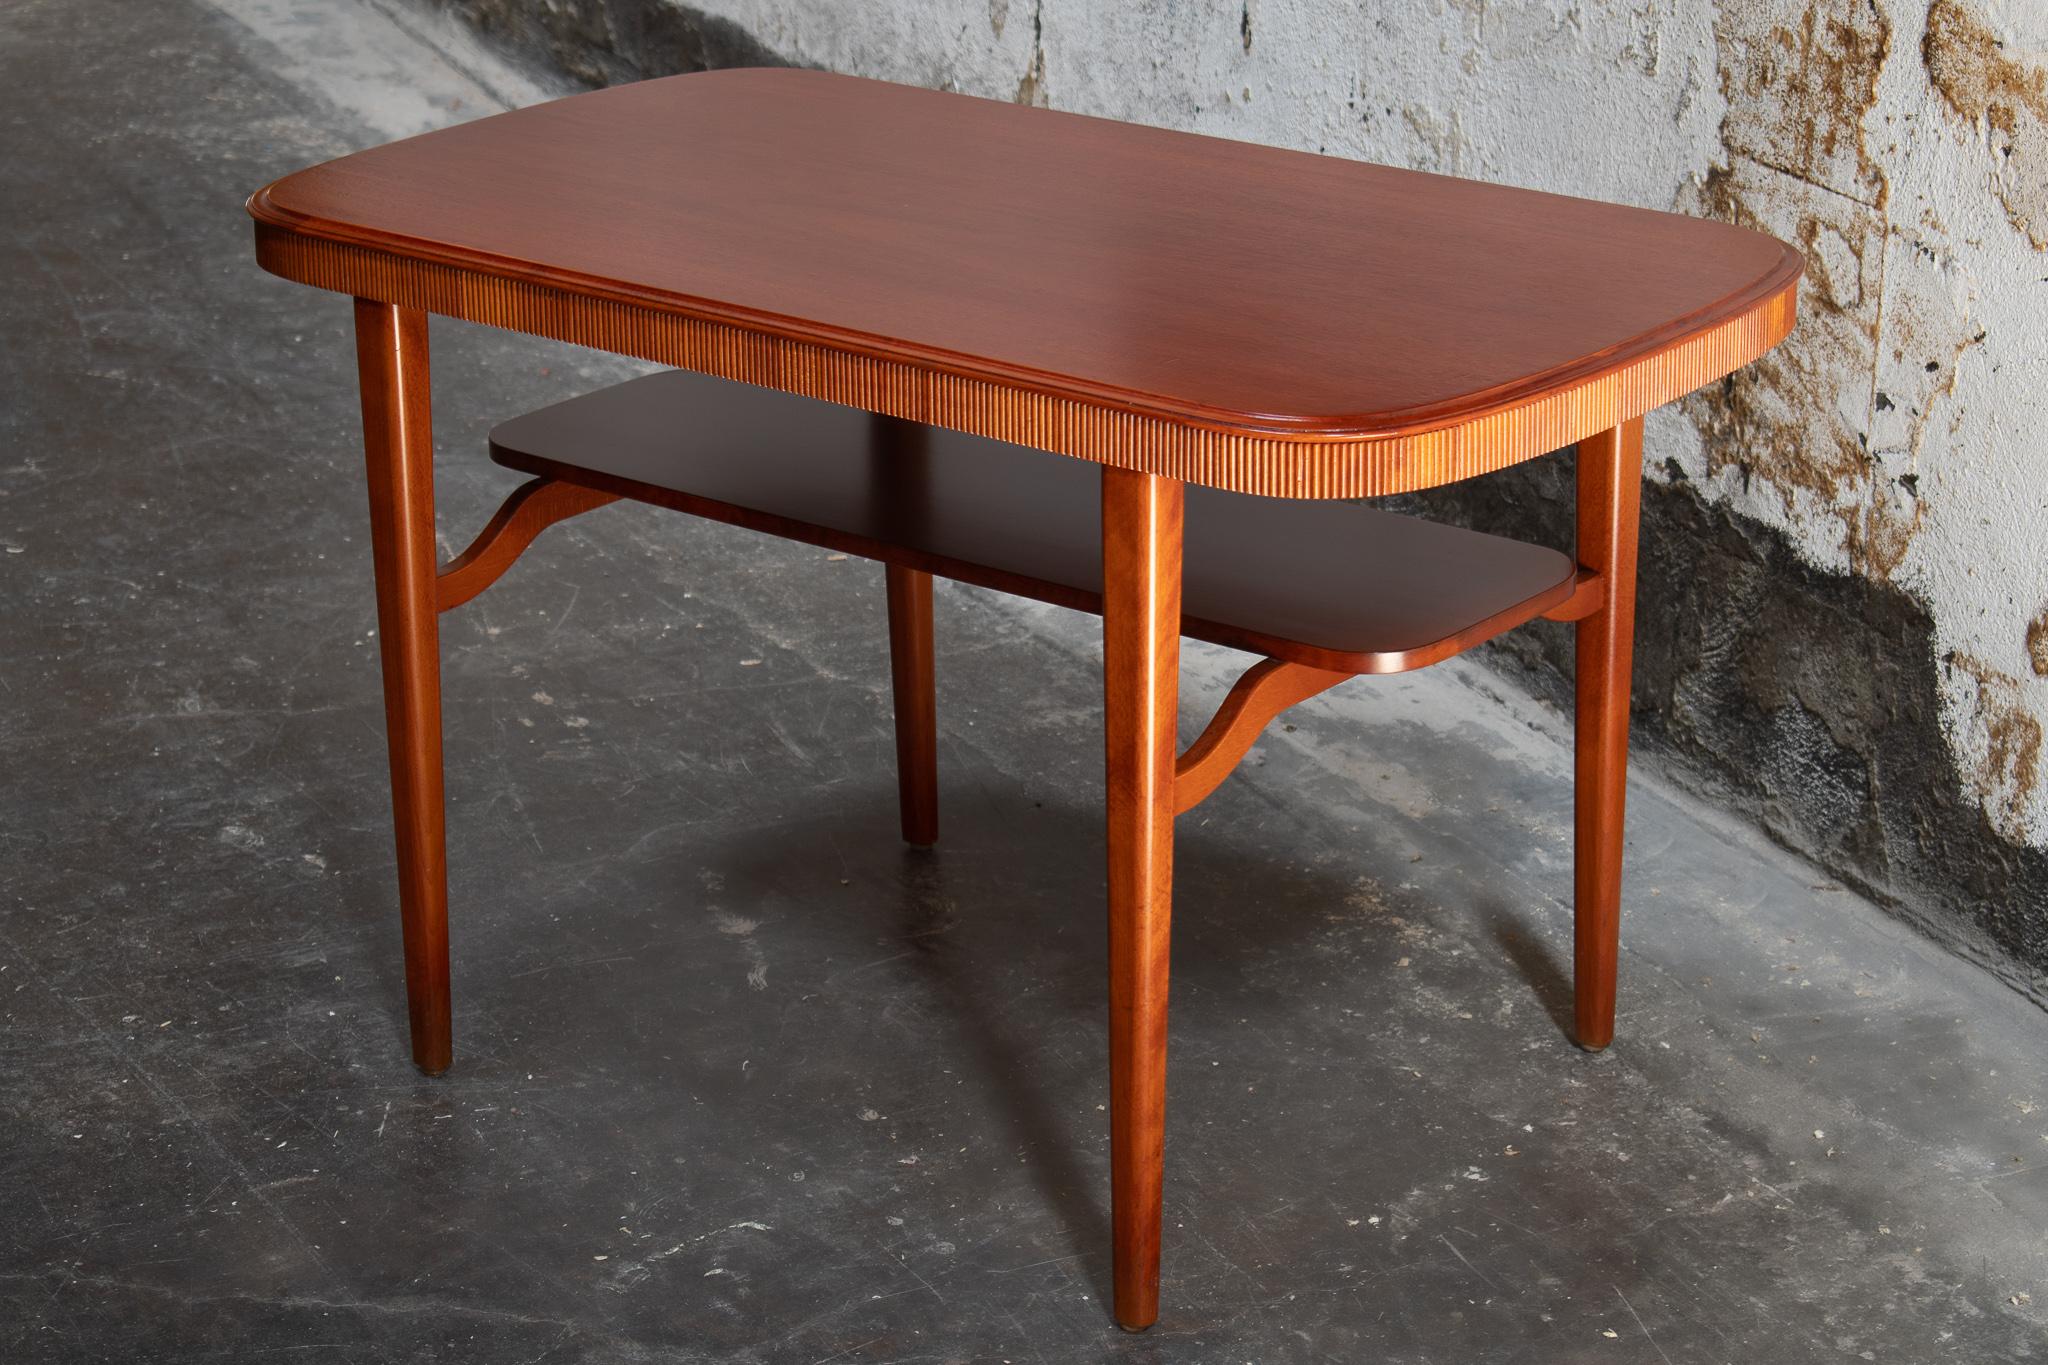 Mid-Century Modern Mahogany End or Coffee Table with Shelf, Sweden, c. 1950 For Sale 1